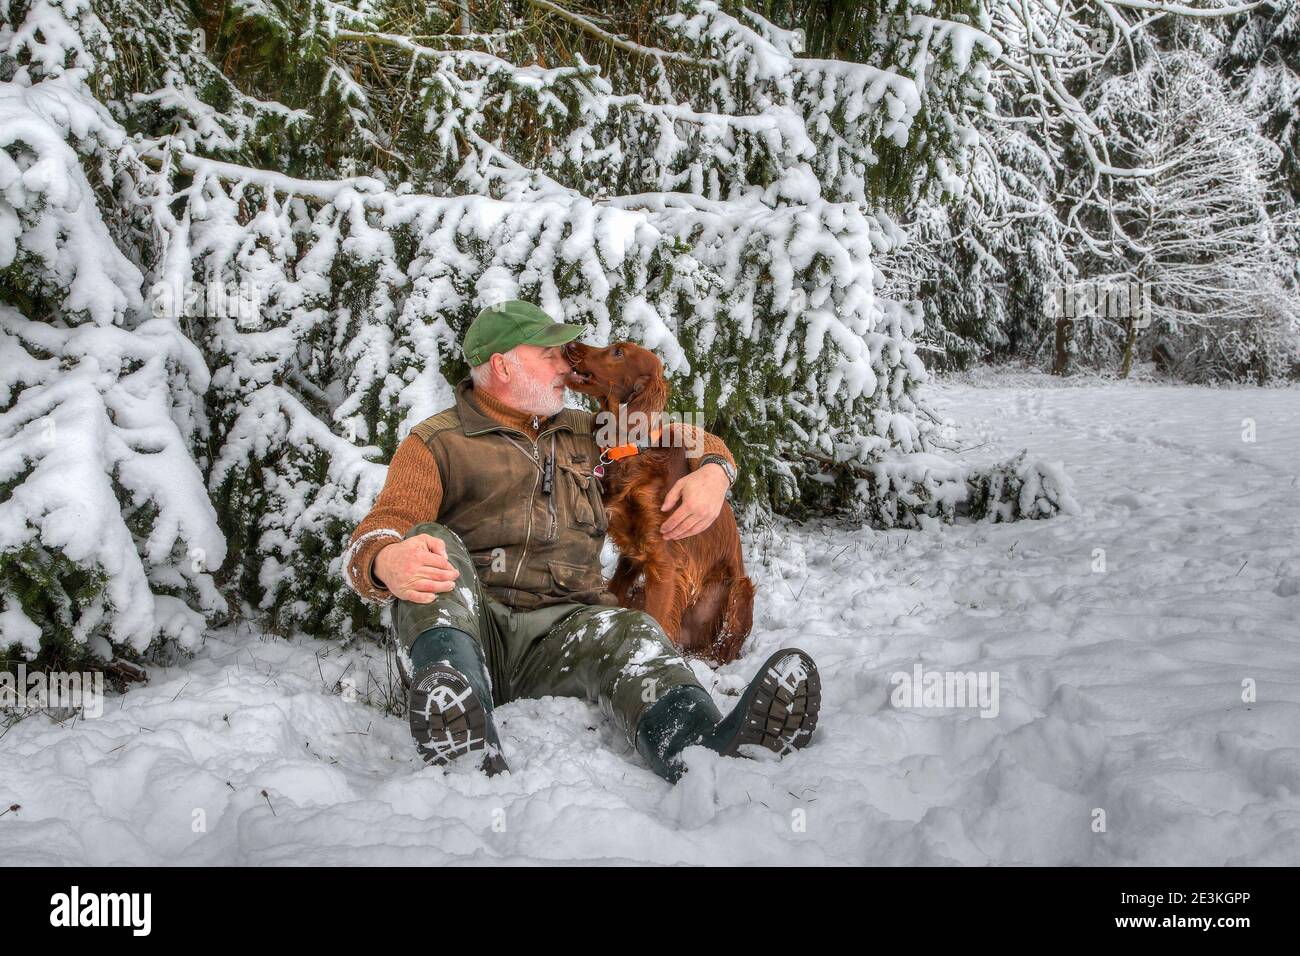 Close friends. In the snowy winter forest an elderly hunter sits in the snow with his young Irish Setter hunting dog and is tenderly bitten in the nos Stock Photo